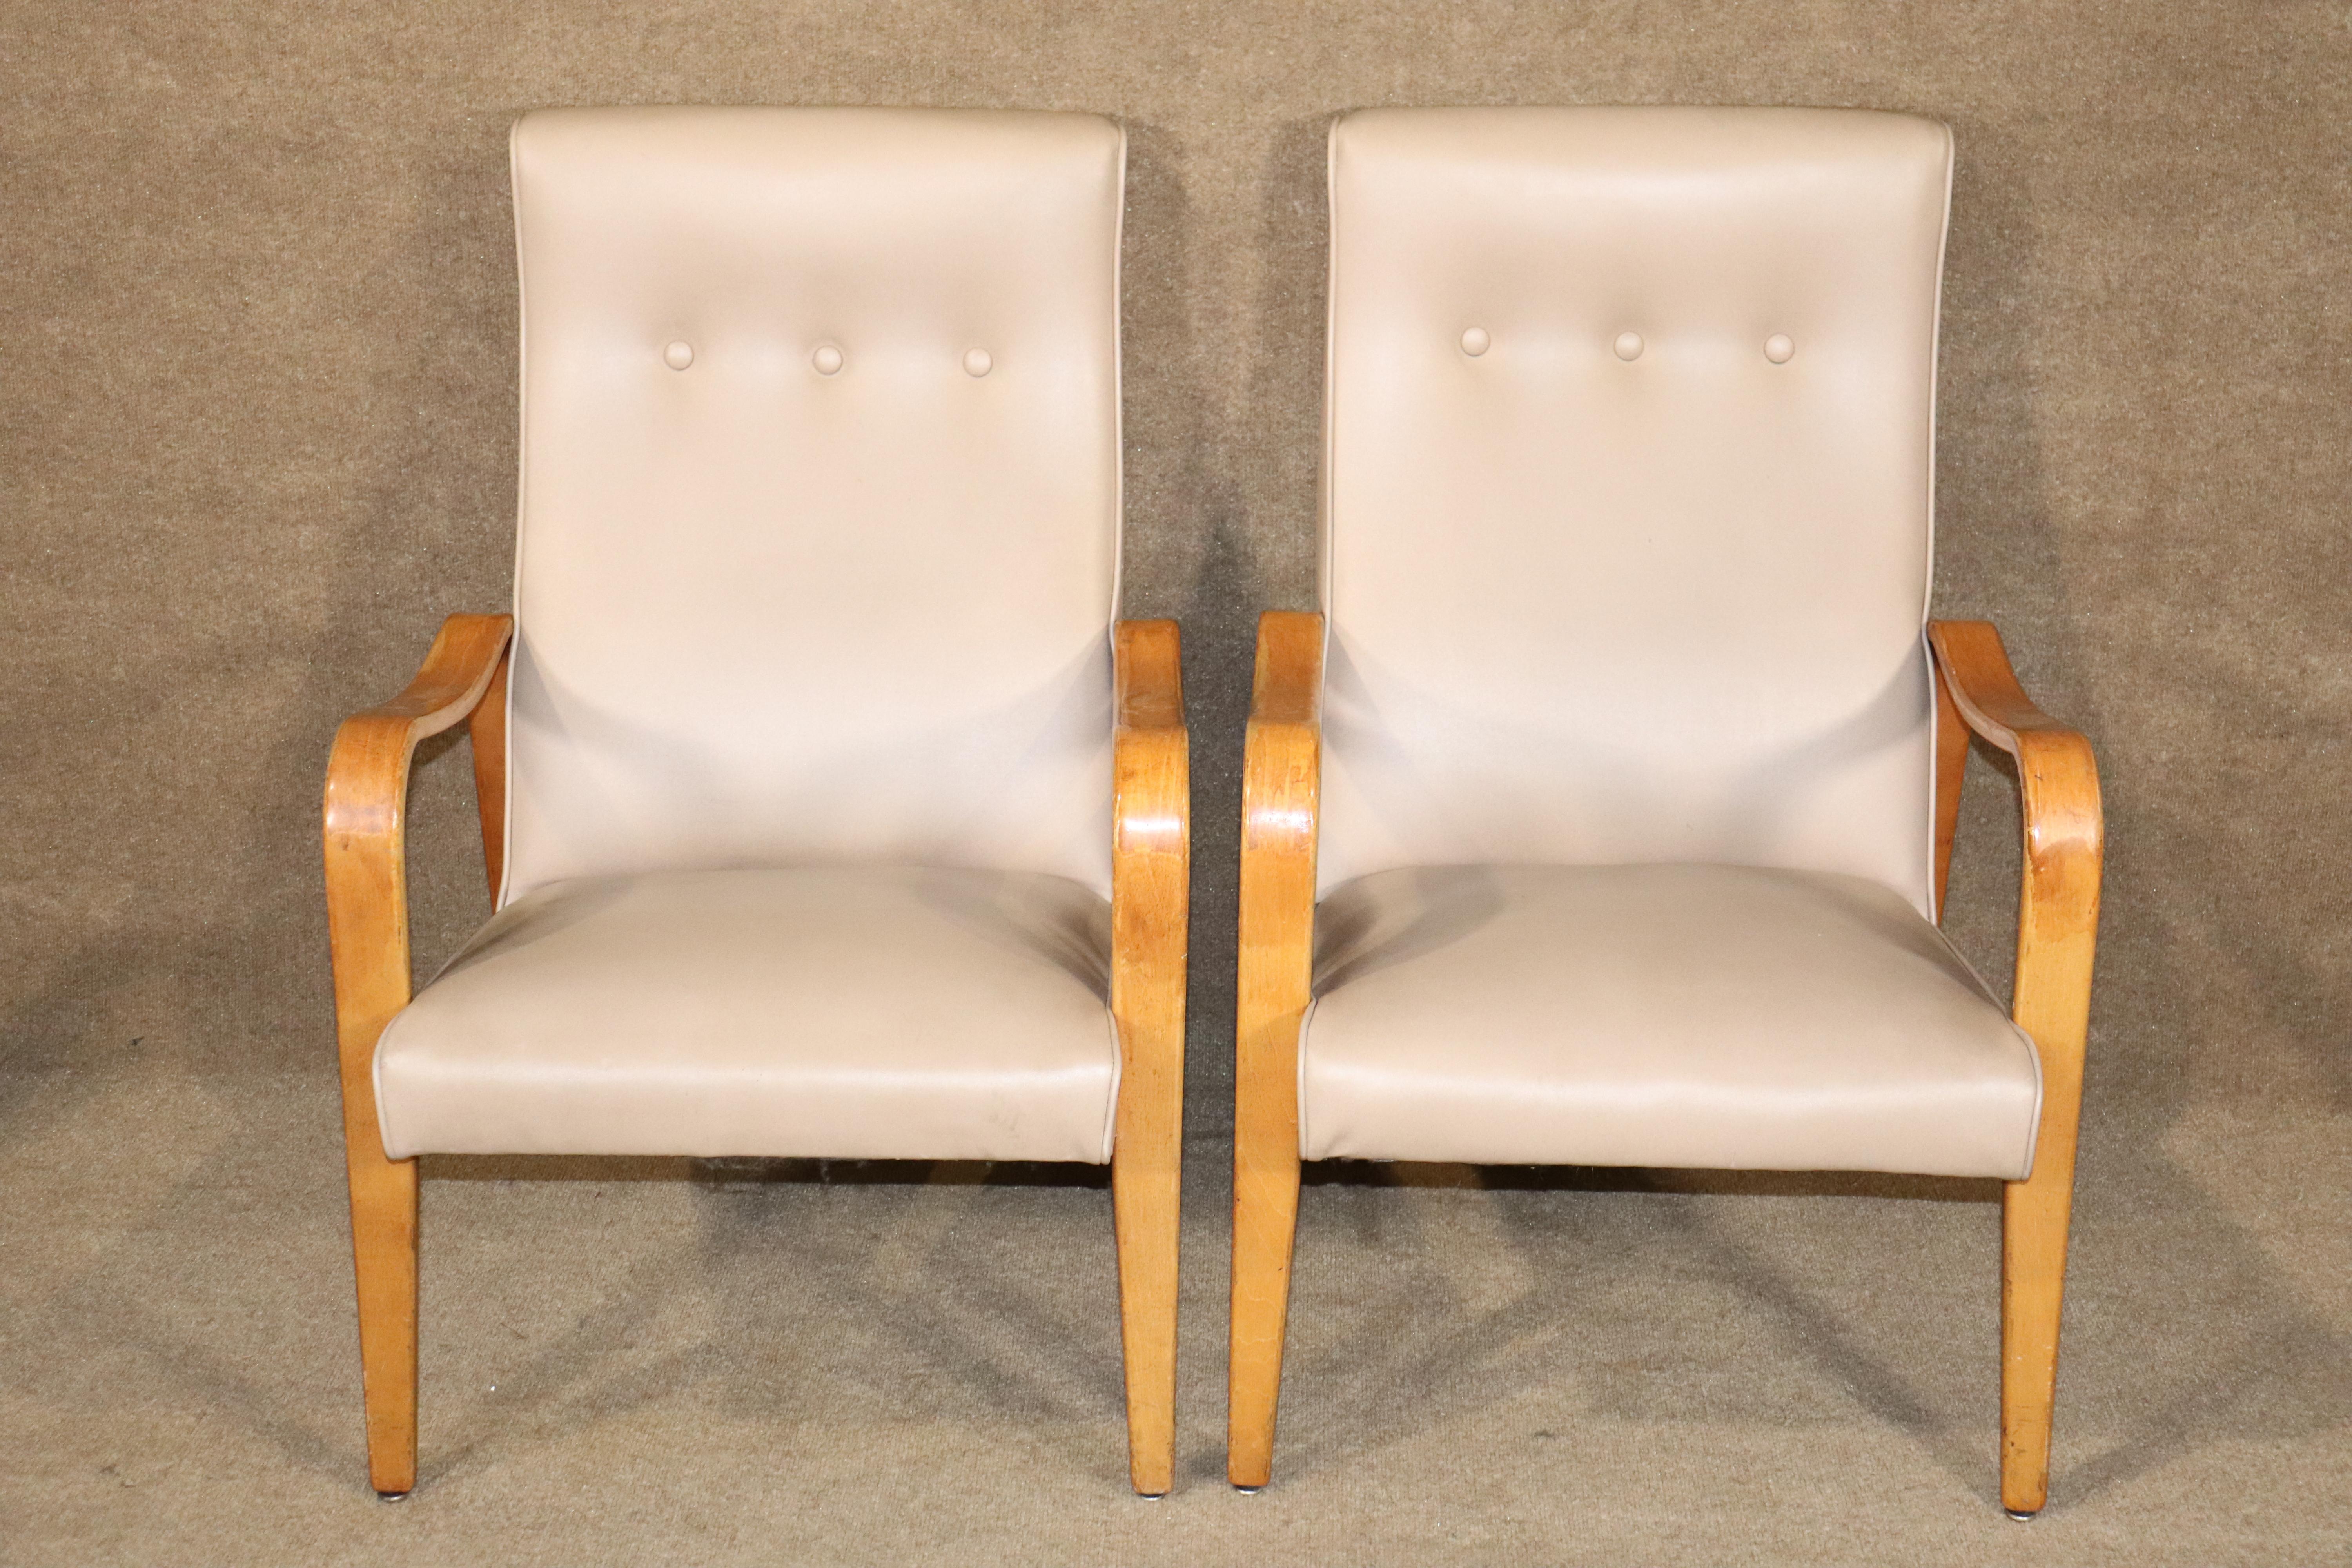 Pair of mid-century modern lounge chairs with sculpted flat bentwood arms. Single 